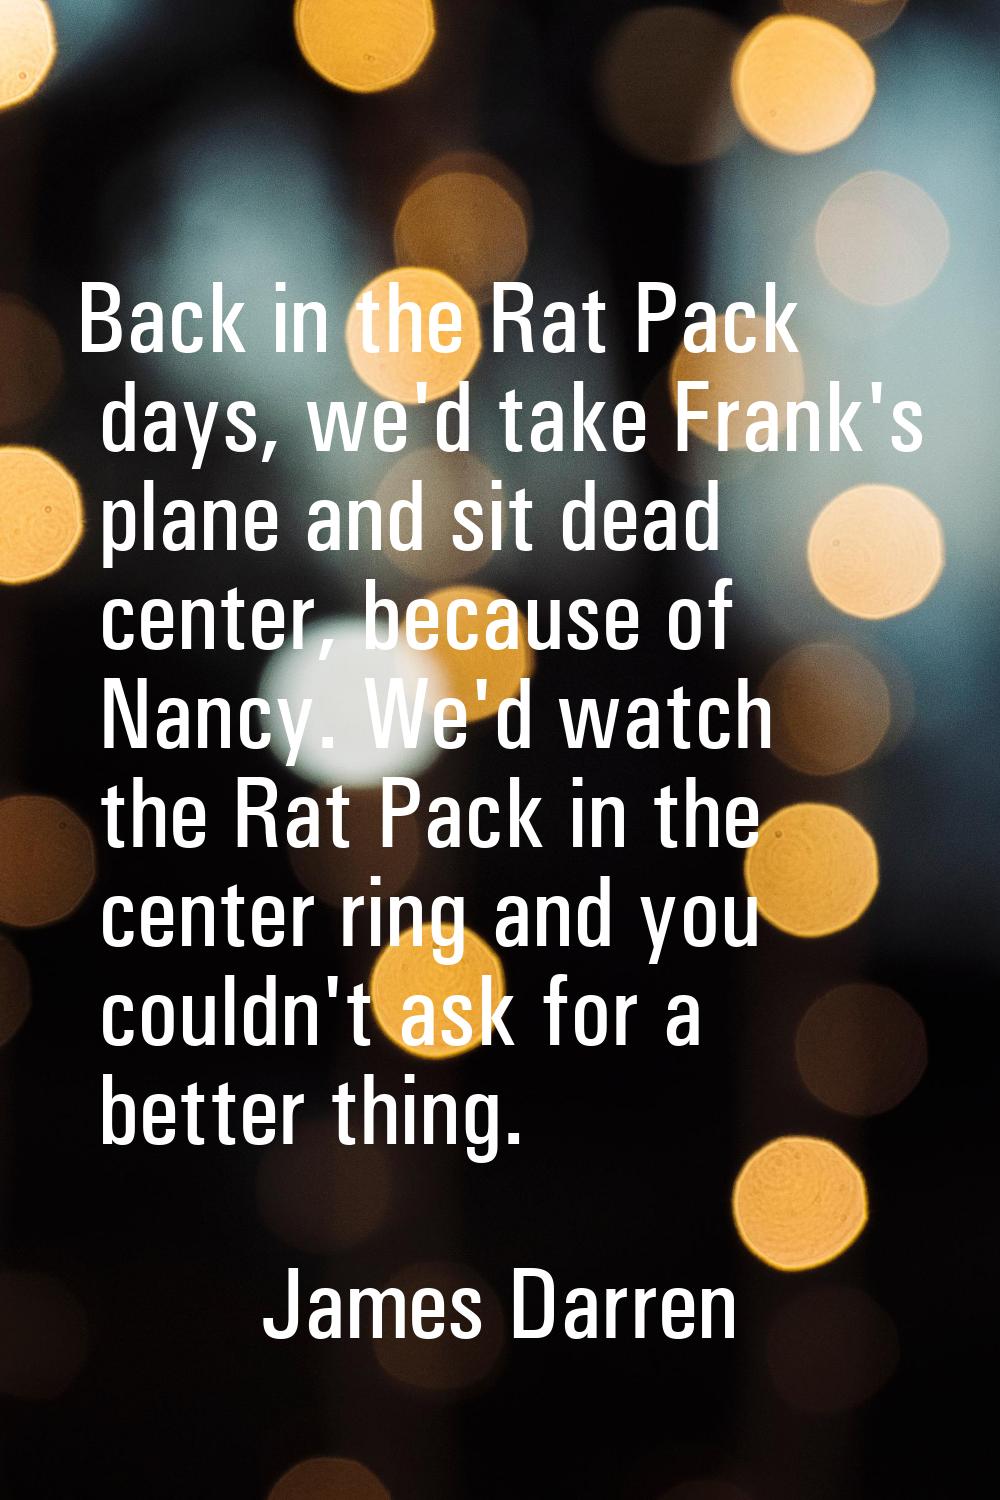 Back in the Rat Pack days, we'd take Frank's plane and sit dead center, because of Nancy. We'd watc